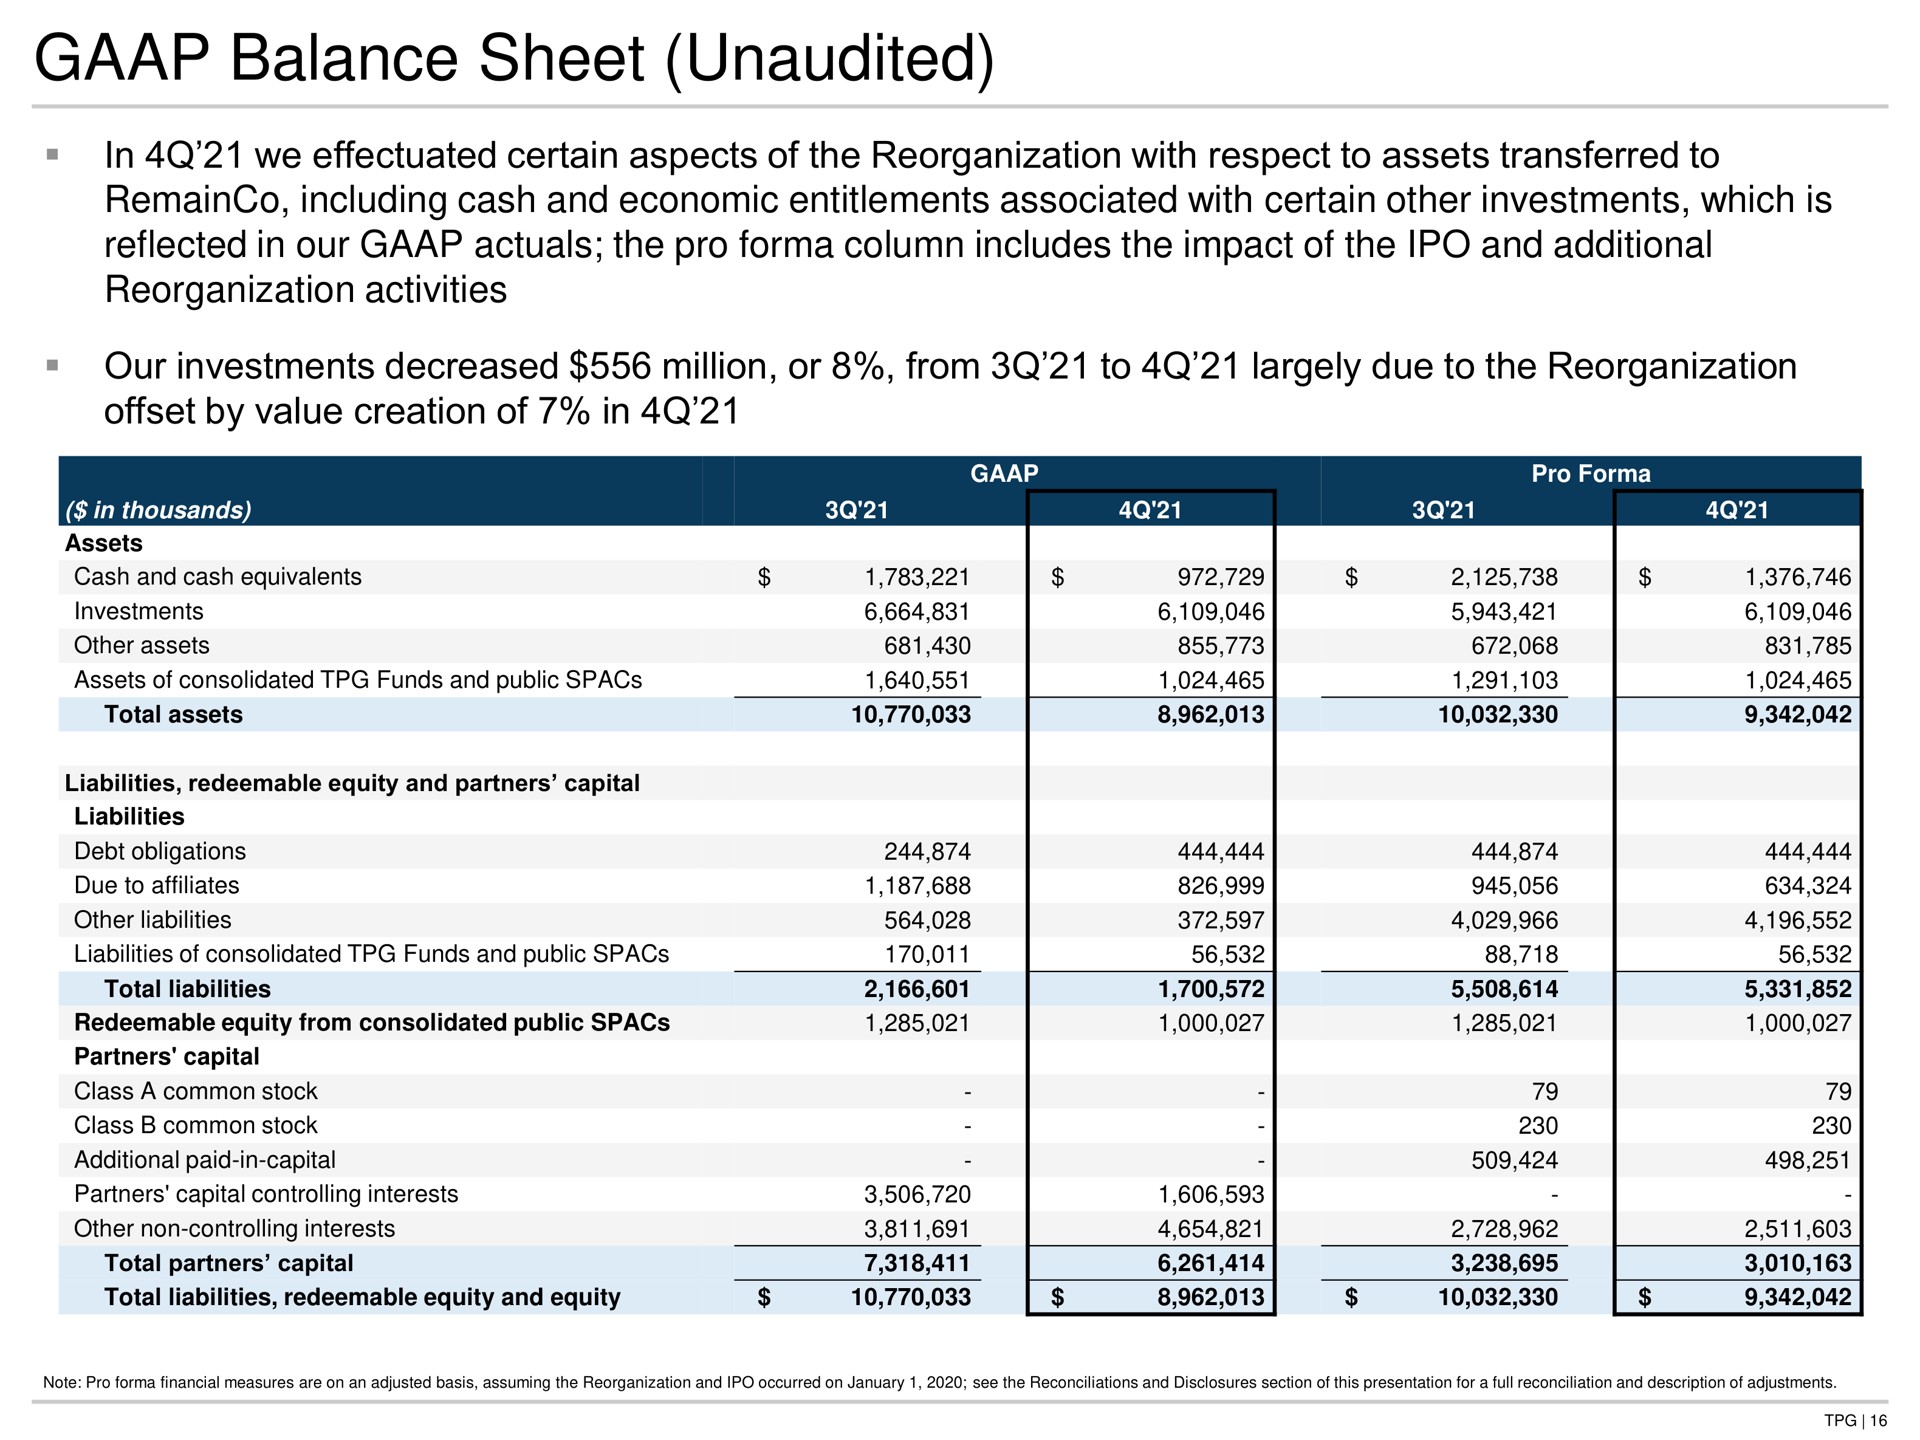 balance sheet unaudited in we effectuated certain aspects of the reorganization with respect to assets transferred to including cash and economic entitlements associated with certain other investments which is reflected in our the pro column includes the impact of the and additional reorganization activities our investments decreased million or from to largely due to the reorganization offset by value creation of in | TPG